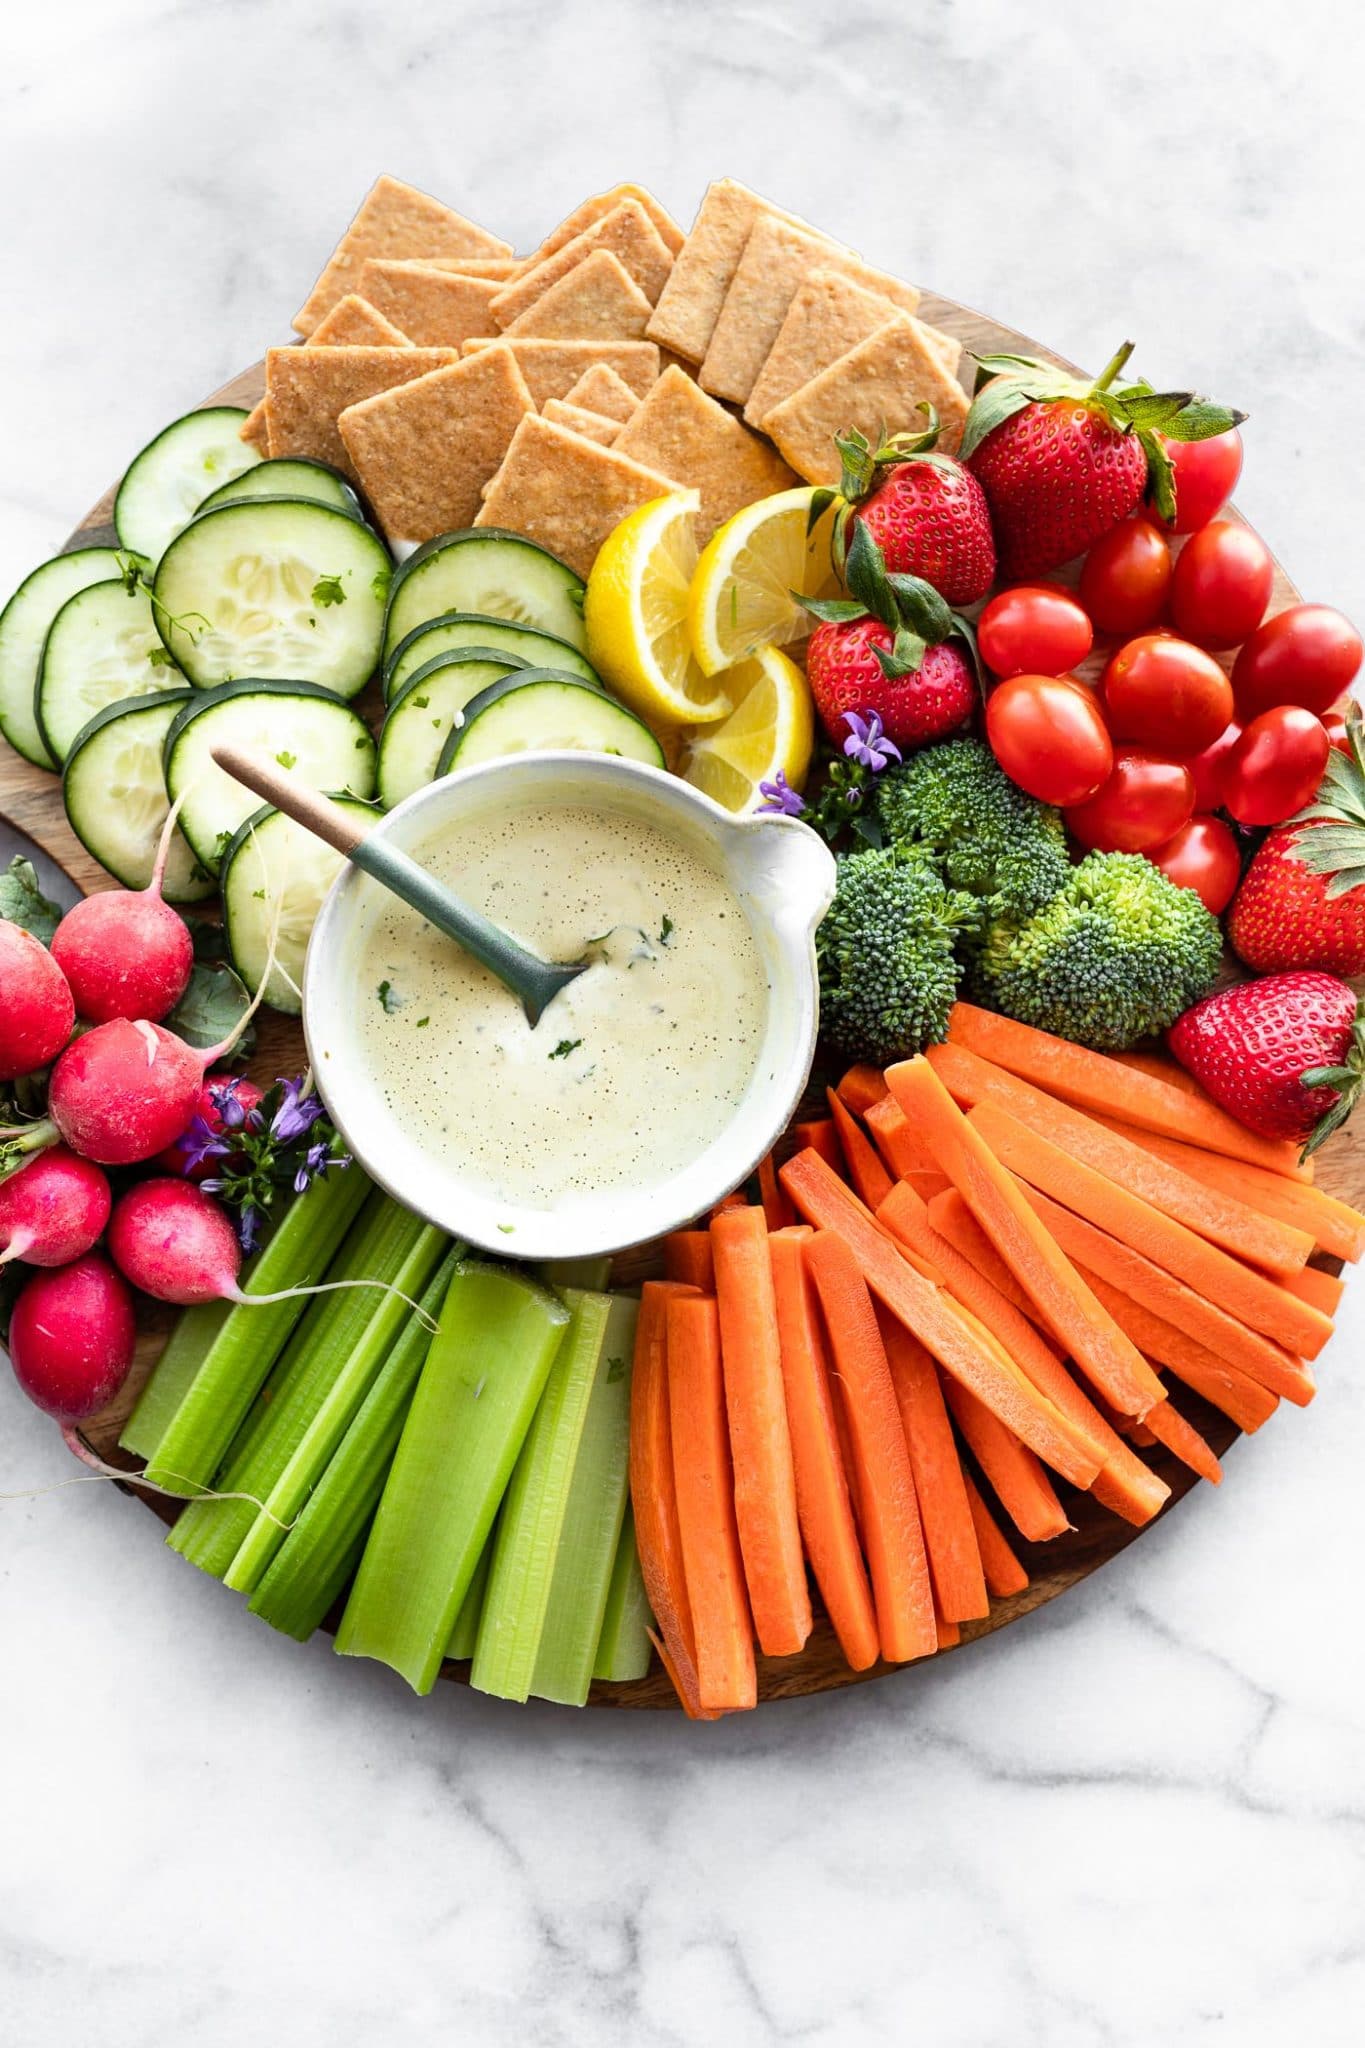 a snack platter with celery sticks, carrot sticks, broccoli florets, strawberries, grape tomatoes, gluten free crackers, lemon wedges, cucumber slices, radishes, and a small bowl of vegan ranch dressing with a spoon in it in the center